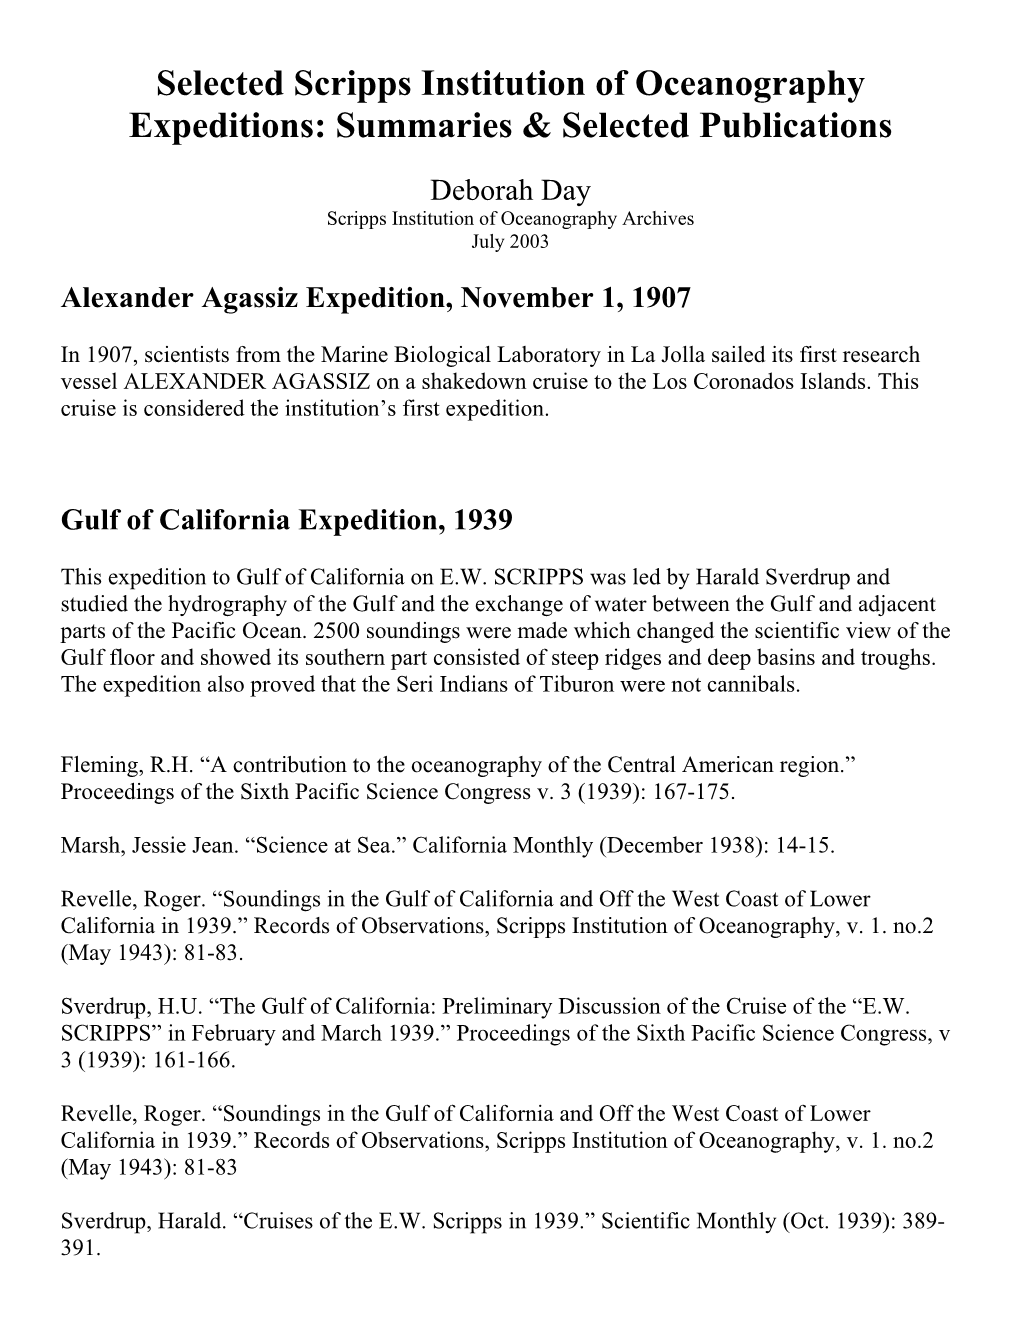 Selected Scripps Institution of Oceanography Expeditions: Summaries & Selected Publications